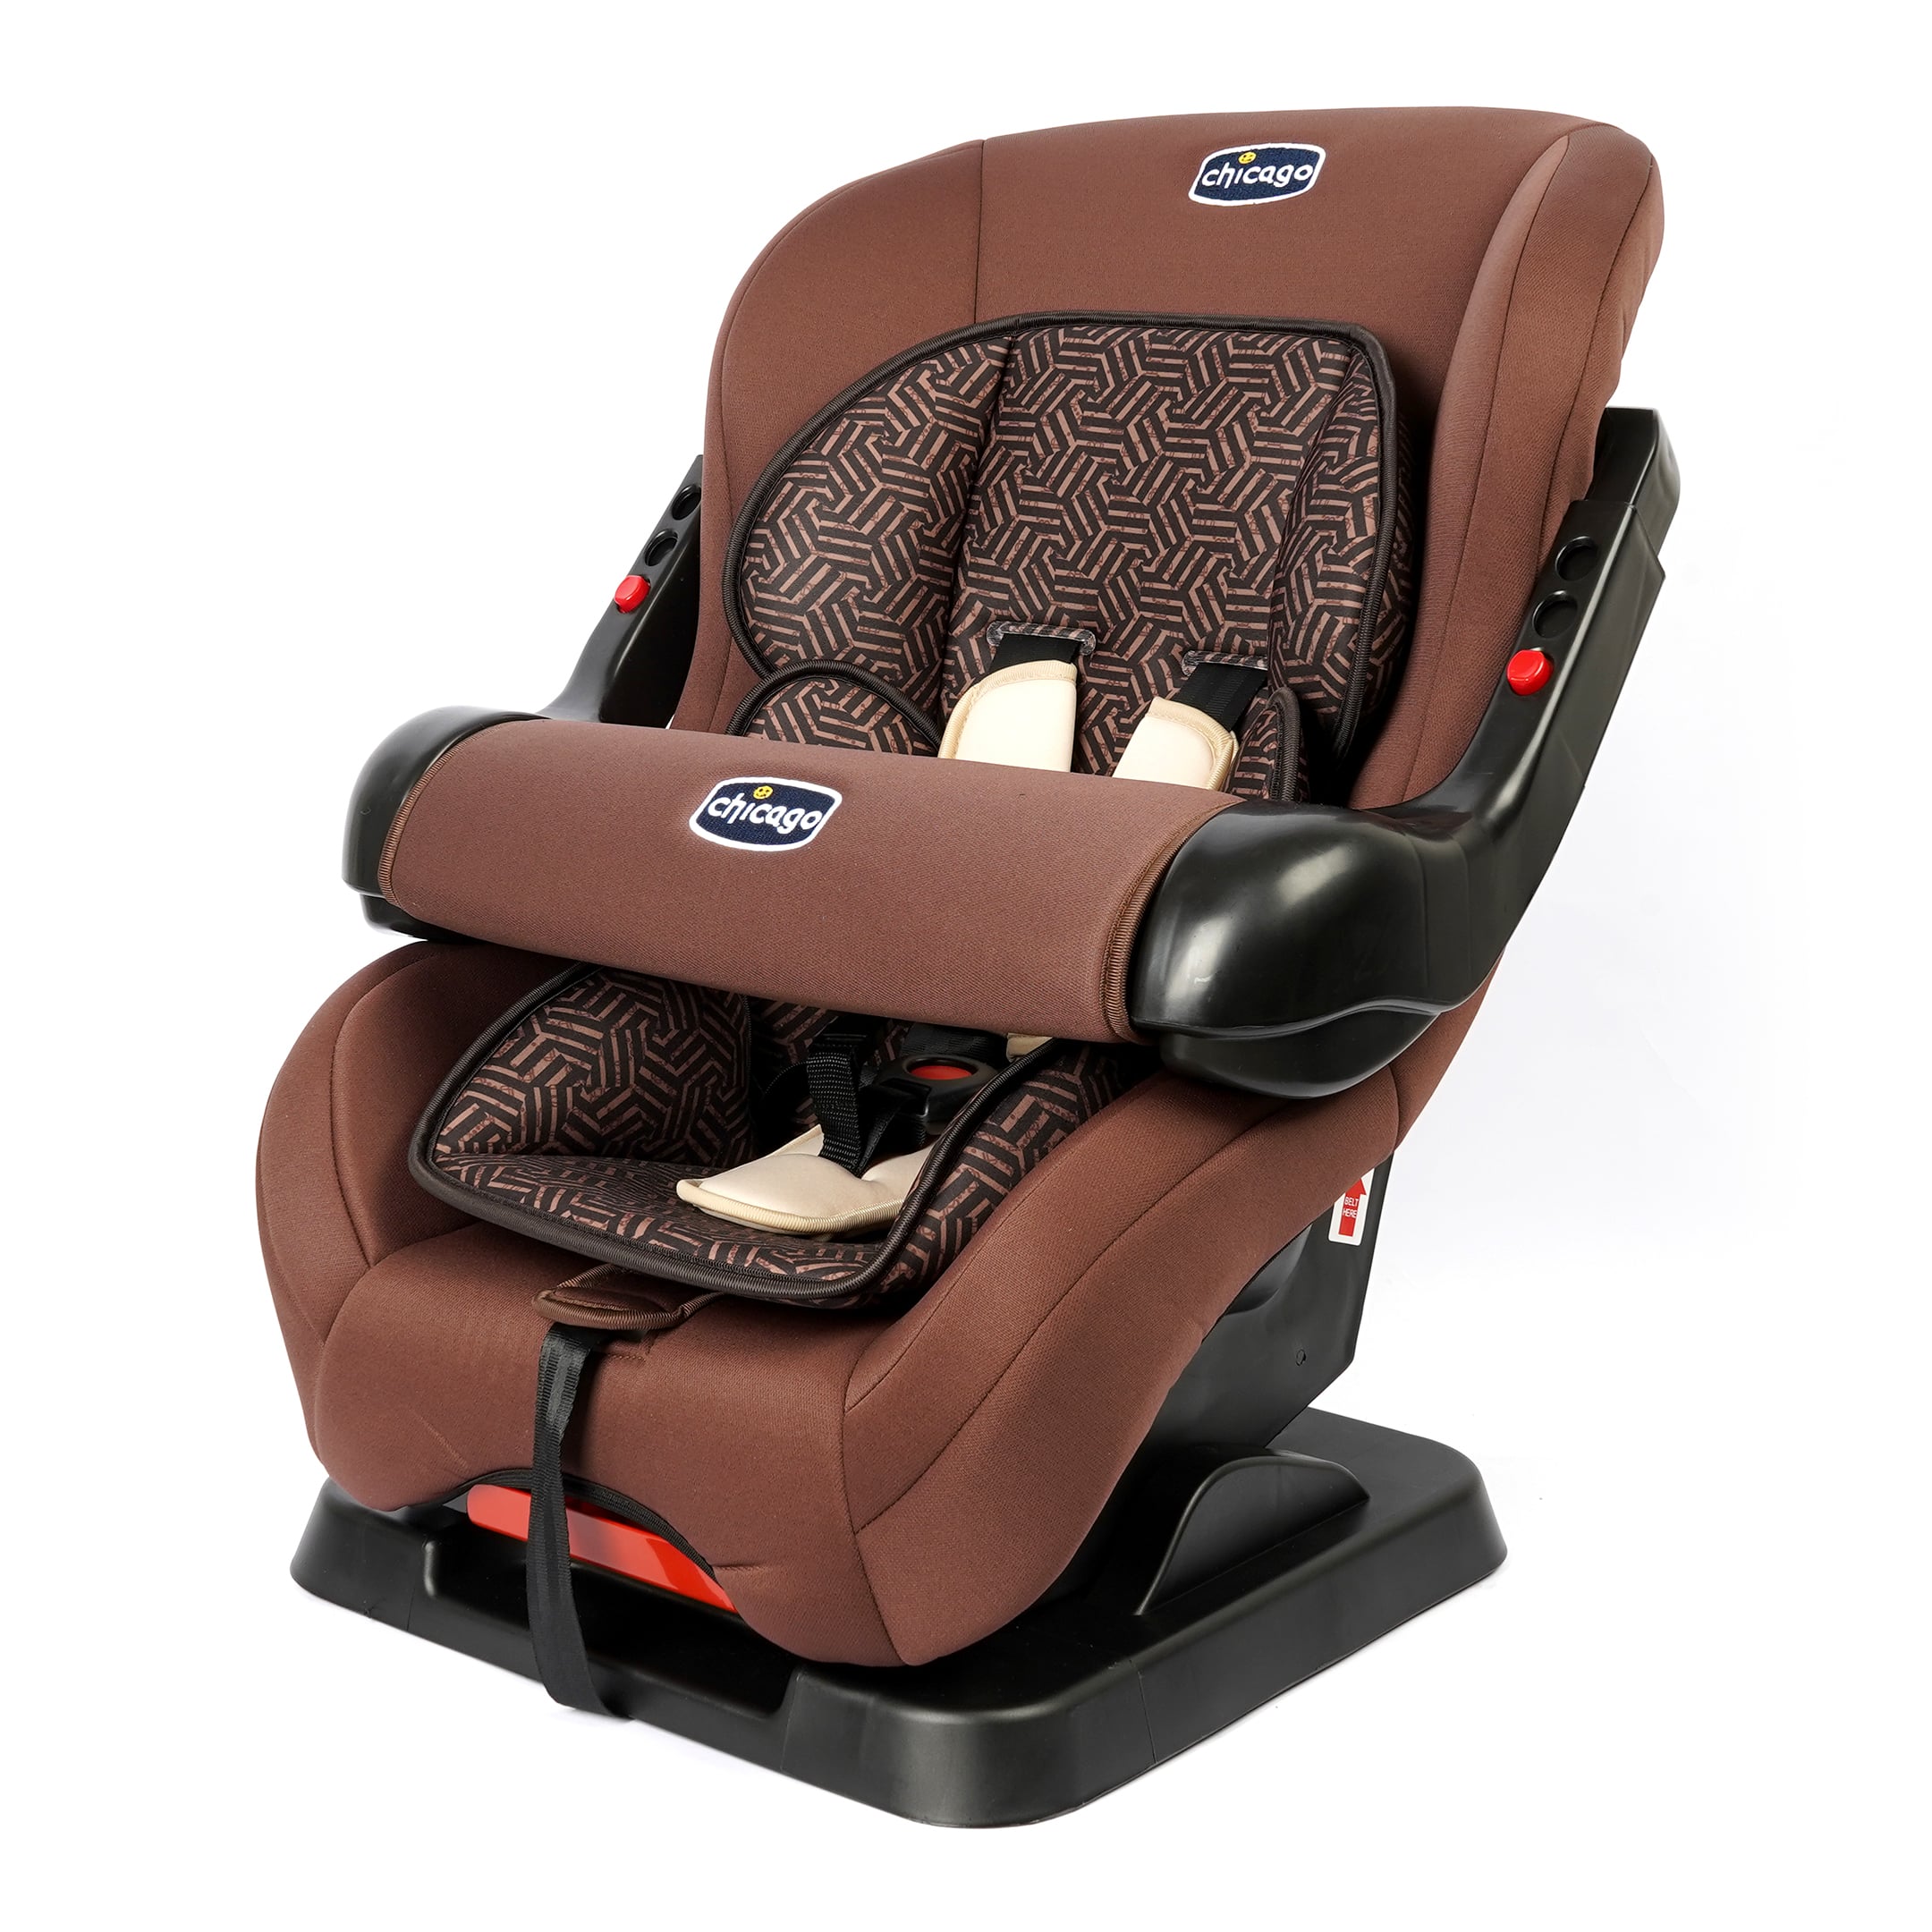 Chicago Baby Car Seat - Brown